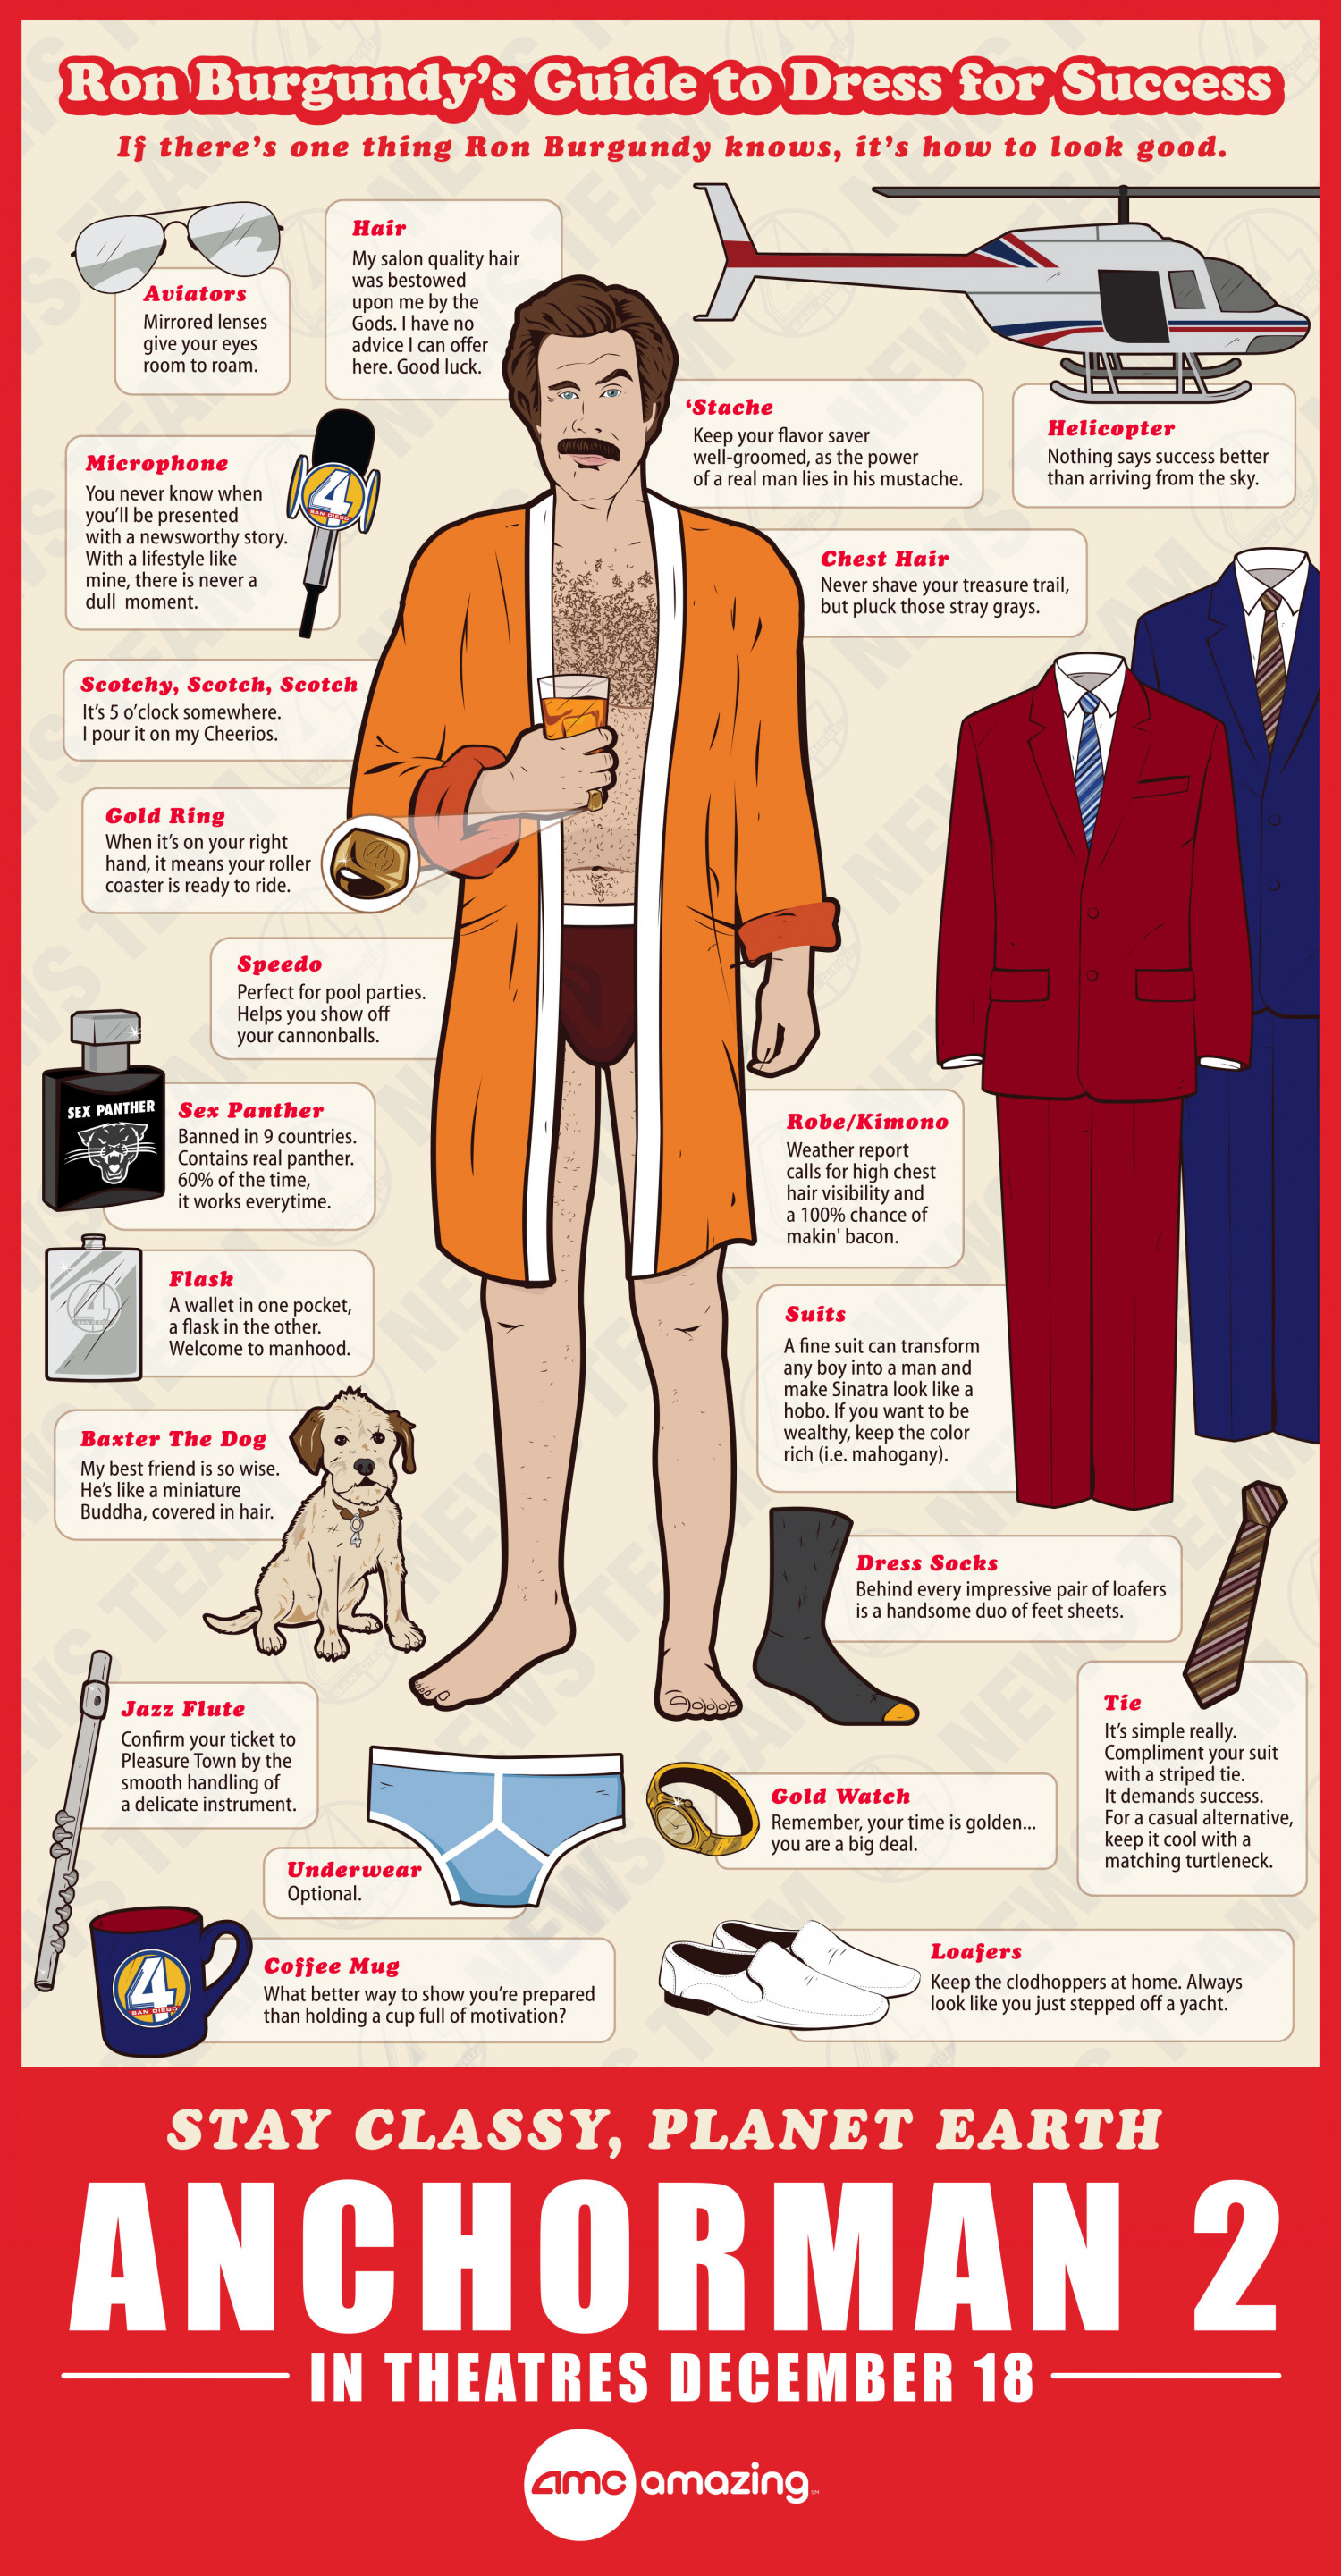 Ron Burgundy’s Guide to Dress for Success Infographic